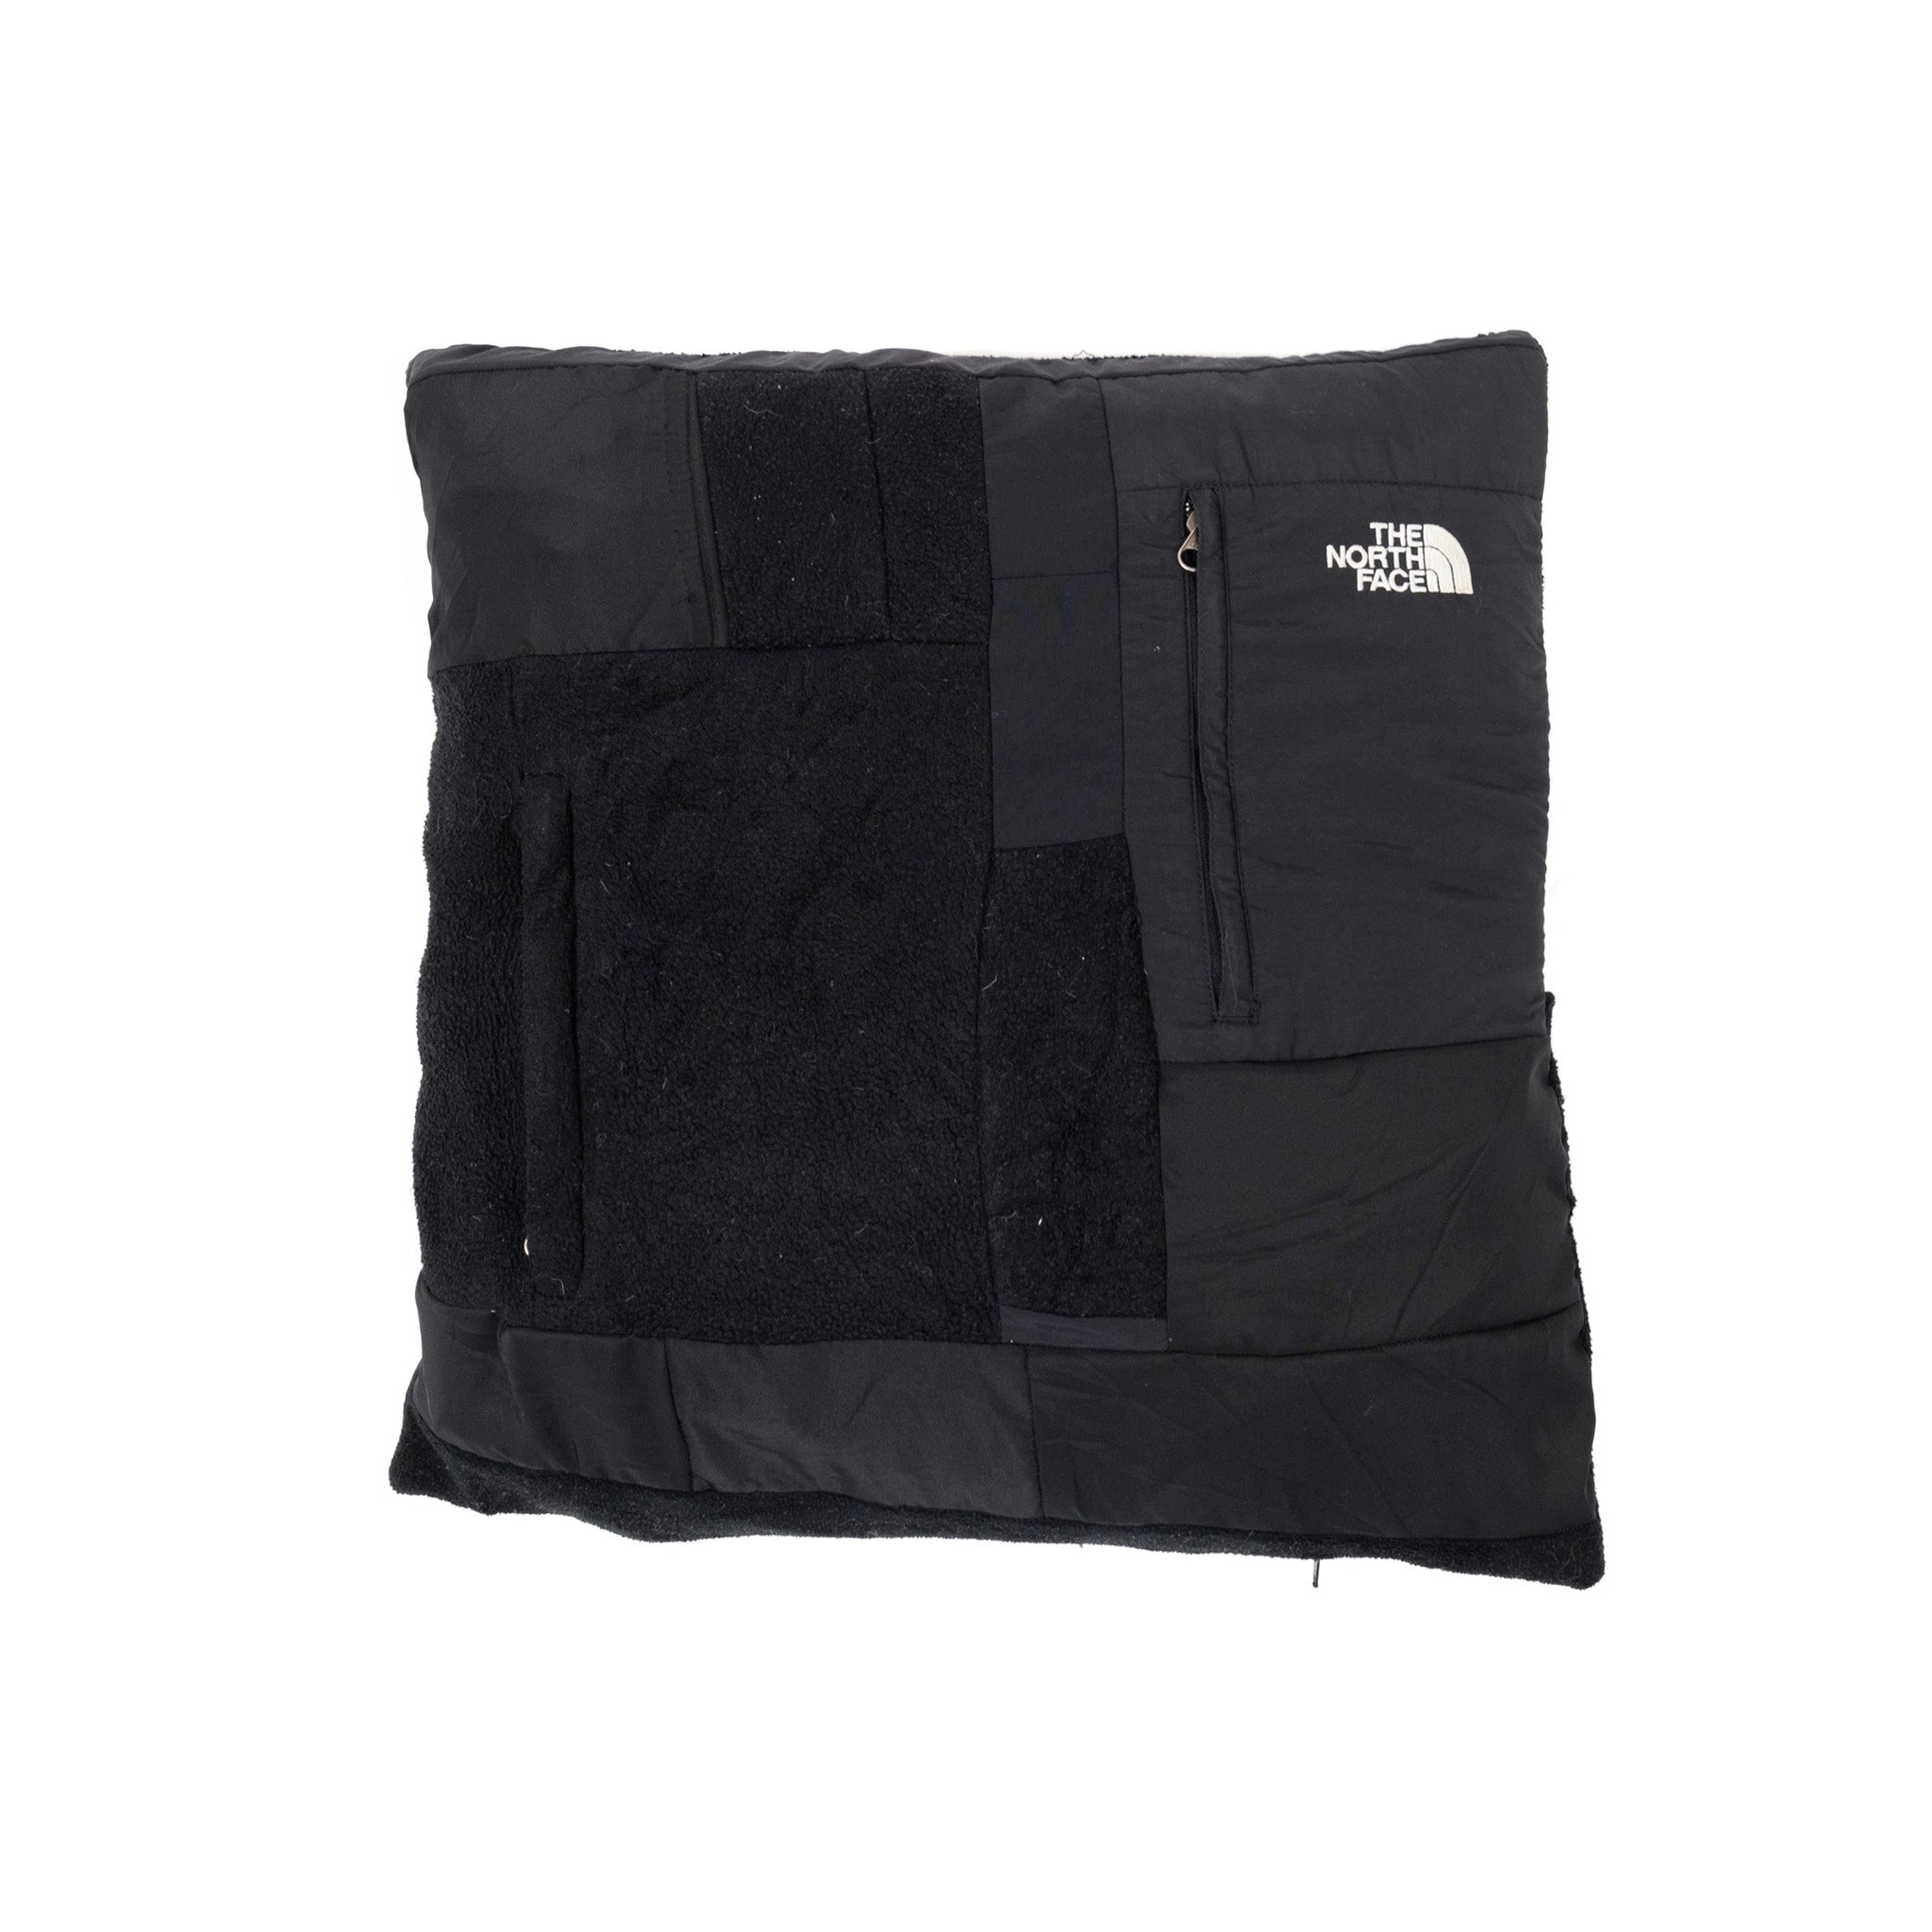 VT Rework: The North Face Pillow